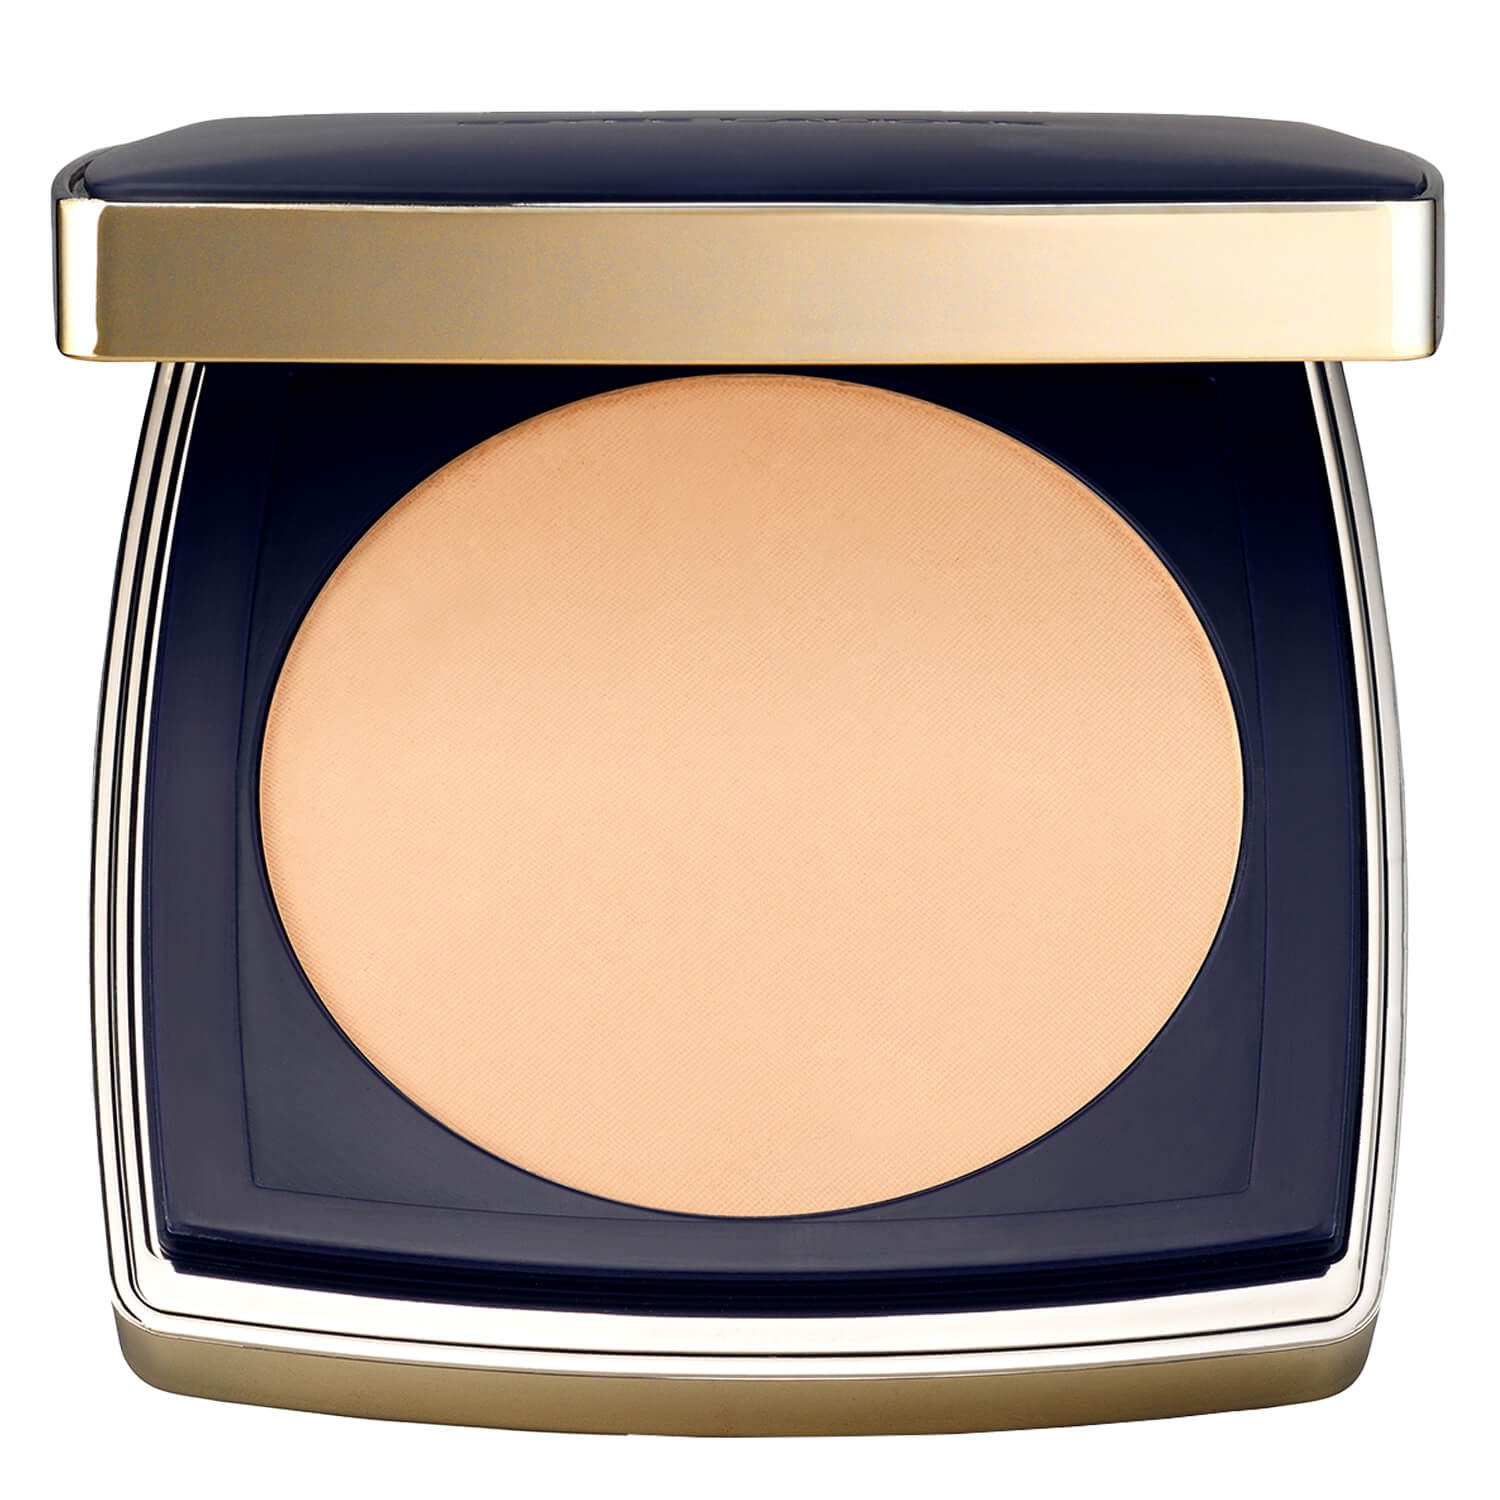 Product image from Double Wear - Matte Powder Foundation 3N1 Ivory Beige